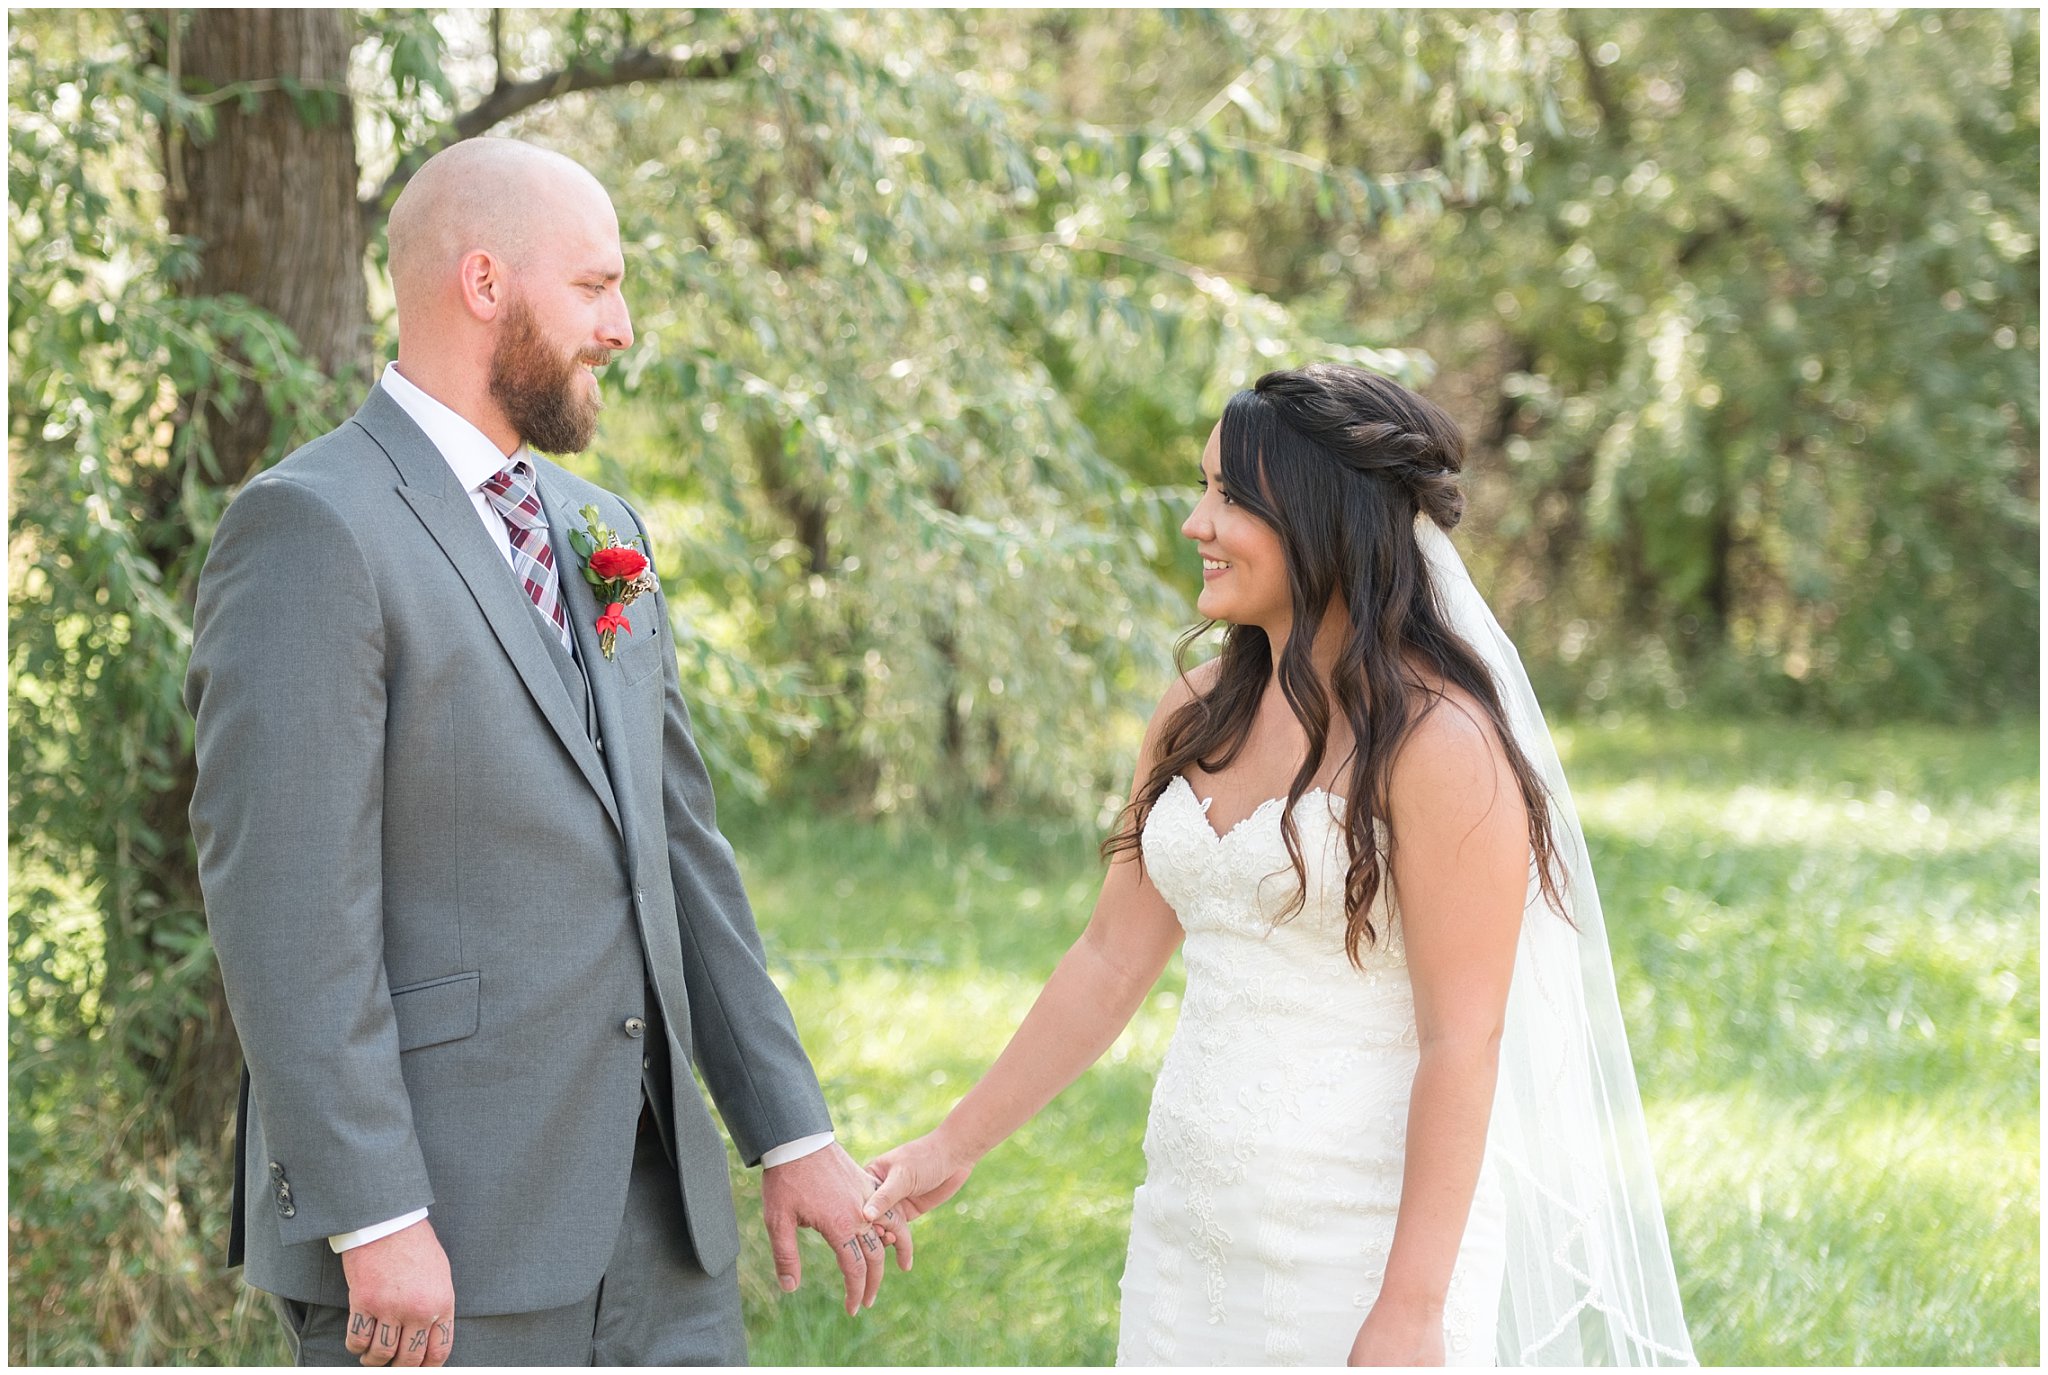 Elegant first look moment in the trees | Davis County Outdoor Wedding | Jessie and Dallin Photography